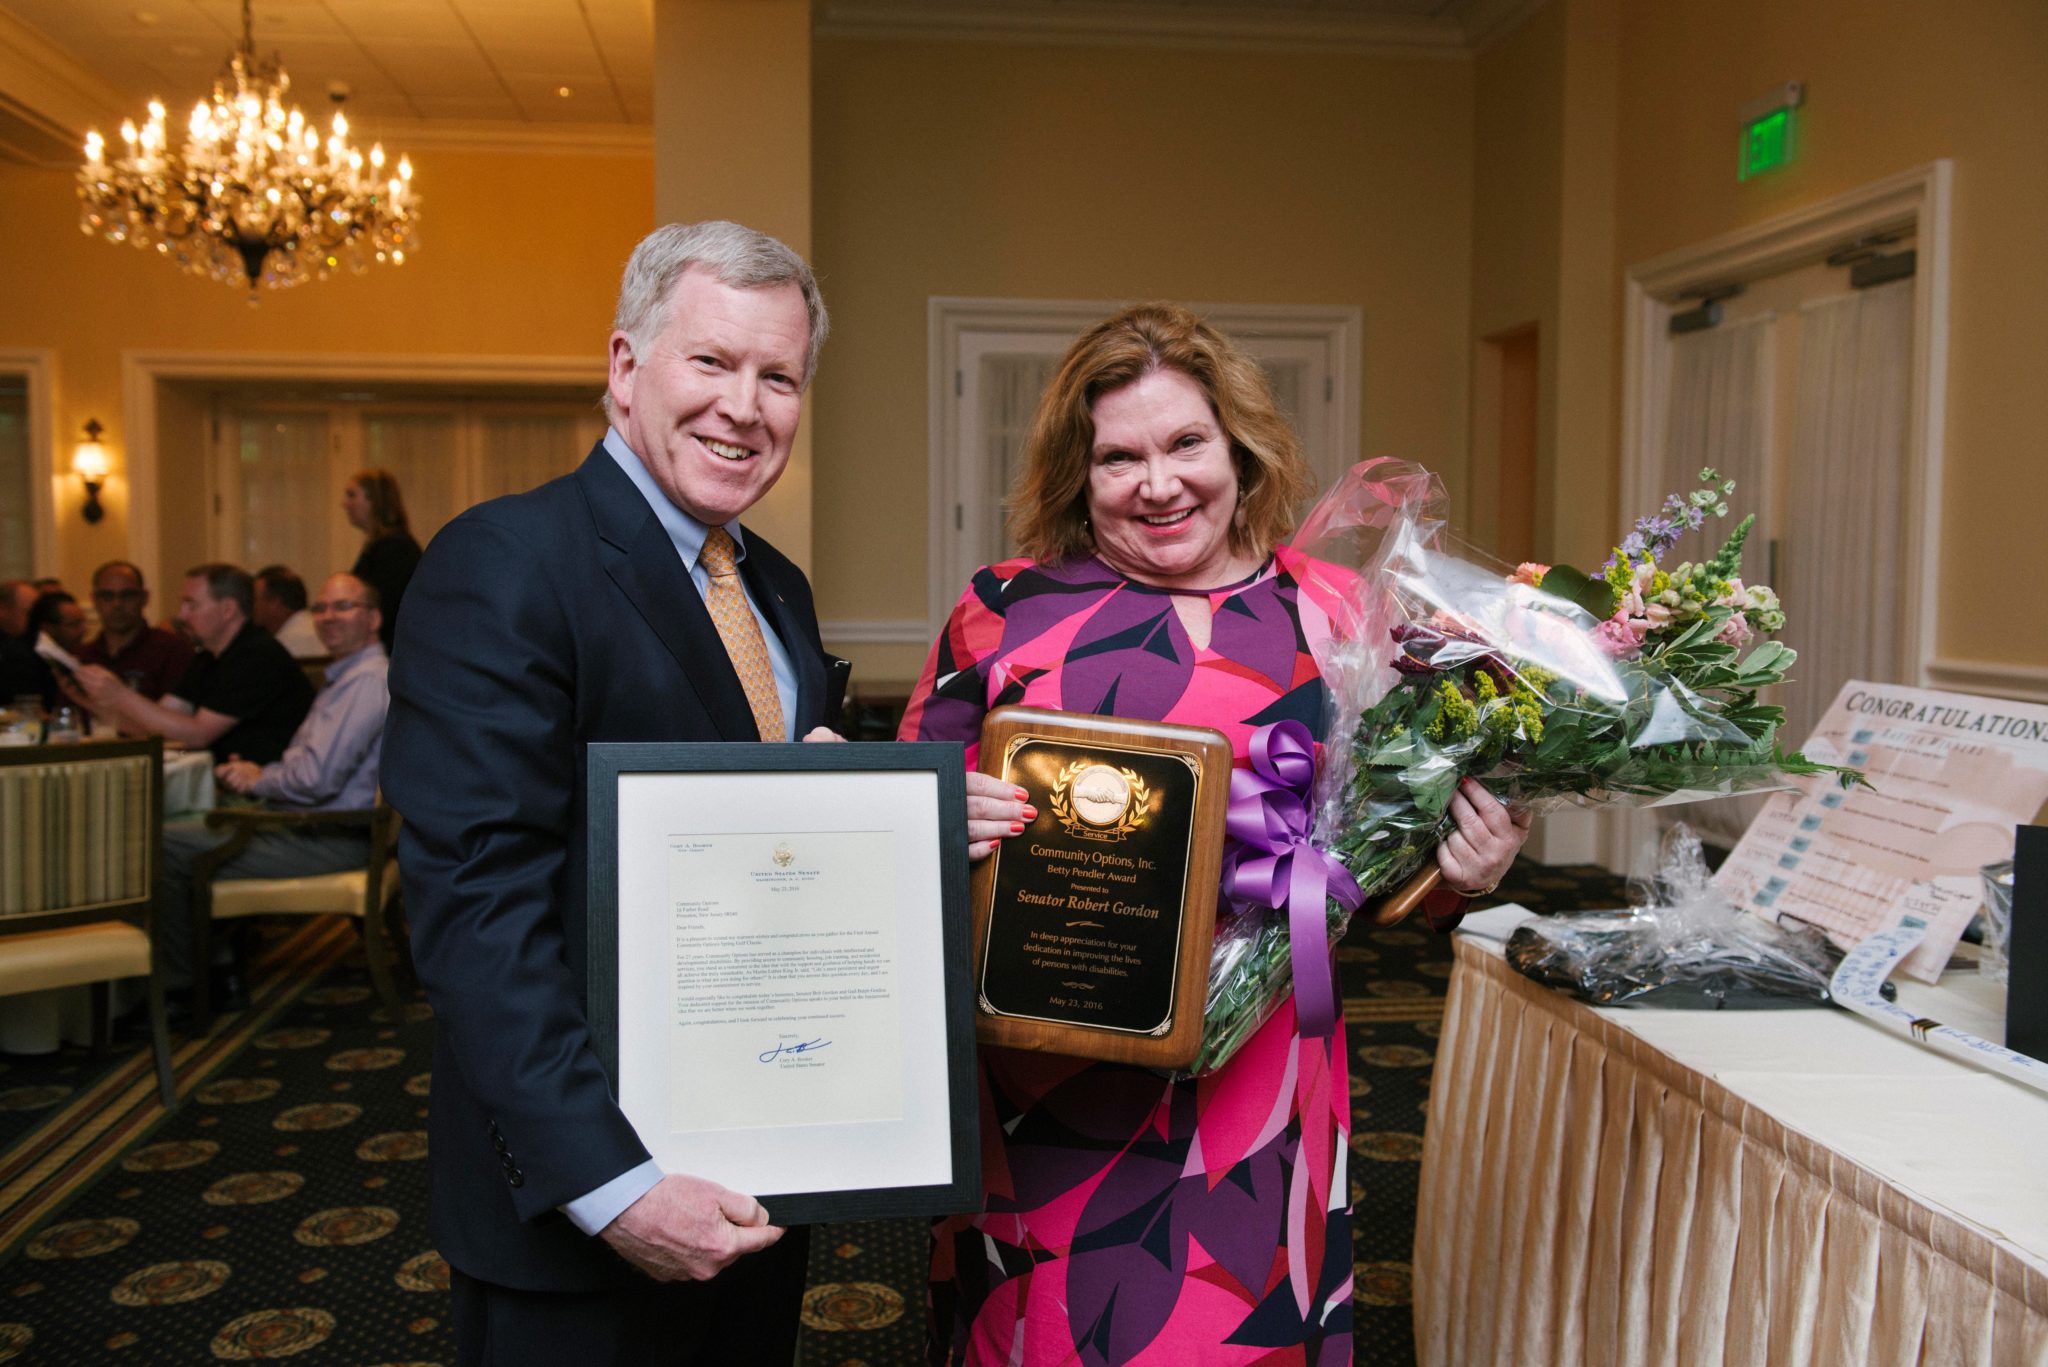 Gail and Senator Gordon were honored during Community Options, Inc.’s spring iMatter Golf Classic at the Alpine Country Club in Demarest on May 23, 2016.